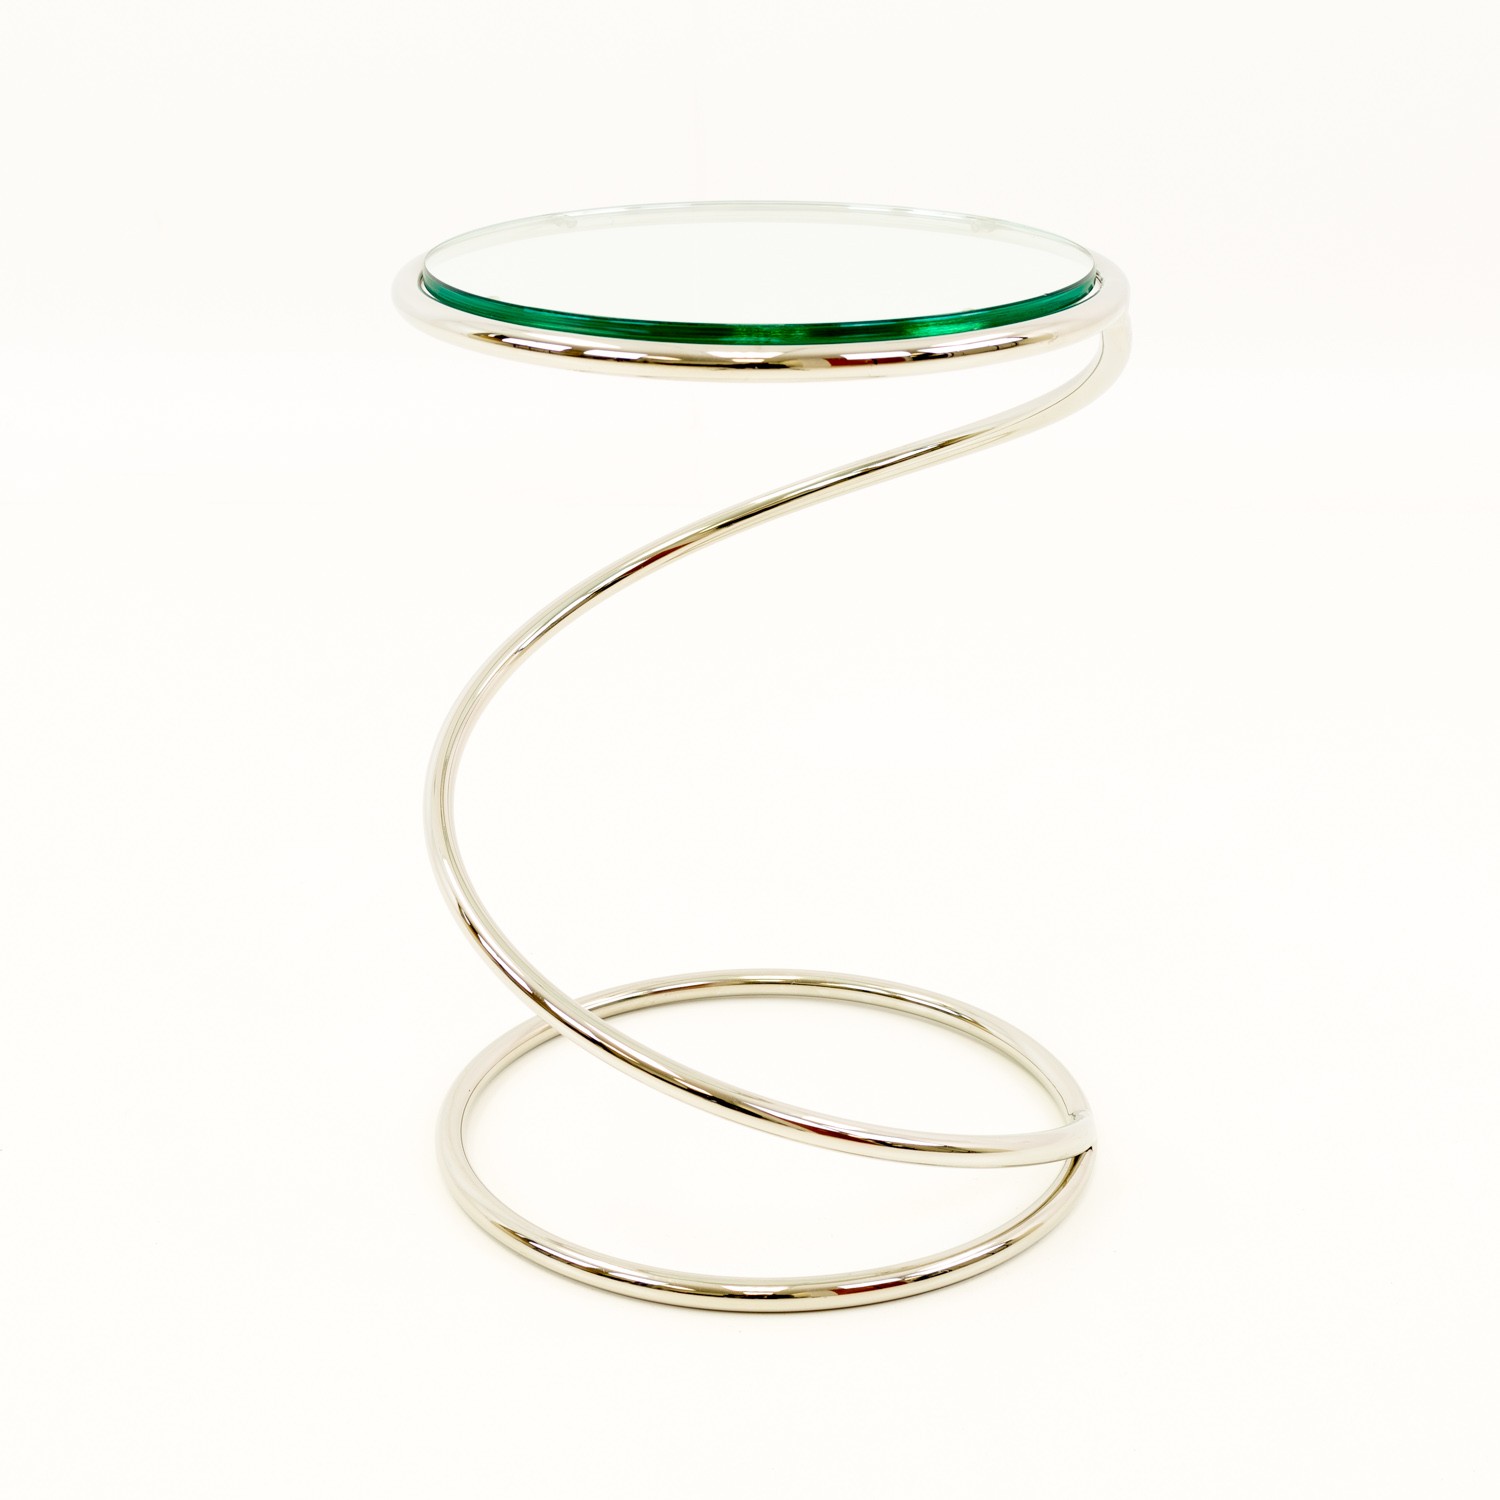 Leon Rosen for Pace Spiral Chrome and Glass Mid Century Side End Table